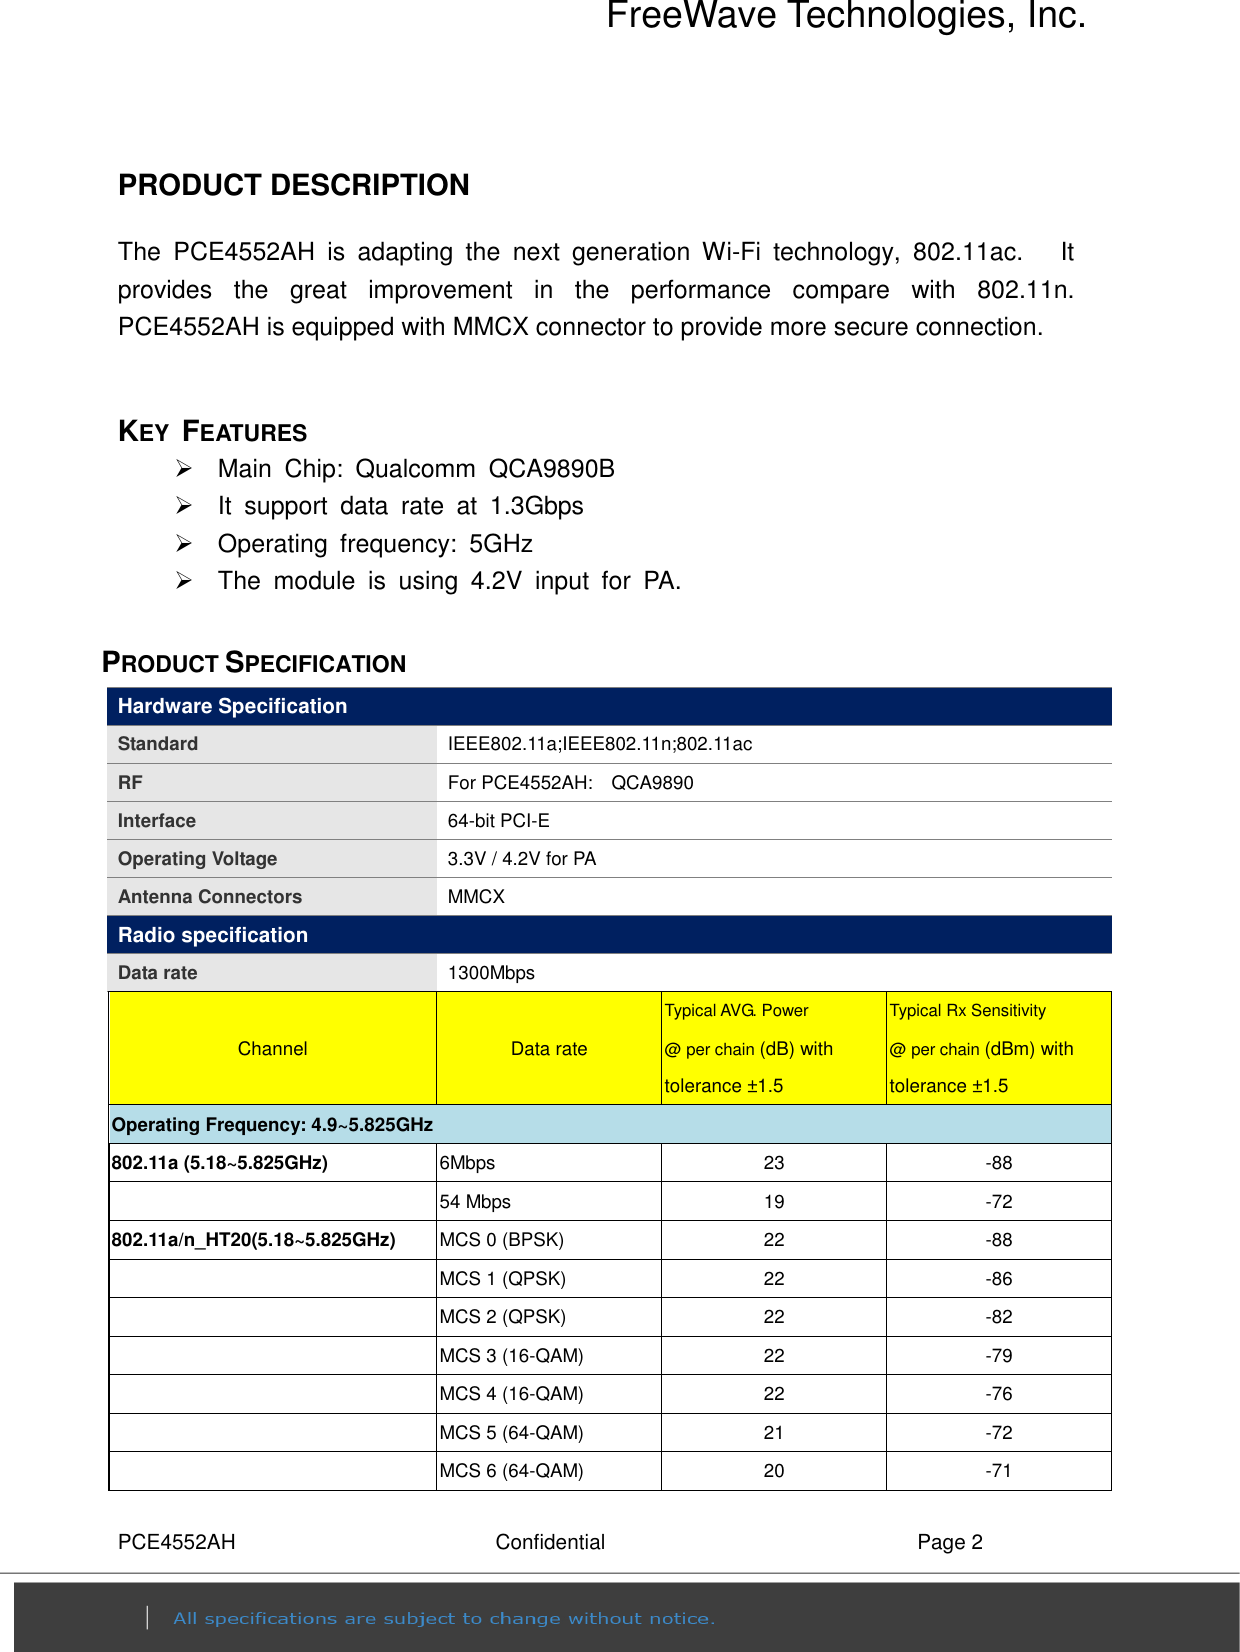 FreeWave Technologies, Inc. PCE4552AH  Confidential  Page 2  PRODUCT DESCRIPTION                       The  PCE4552AH  is  adapting  the  next  generation  Wi-Fi  technology,  802.11ac.      It provides  the  great  improvement  in  the  performance  compare  with  802.11n.   PCE4552AH is equipped with MMCX connector to provide more secure connection.  KEY FEATURES     Main  Chip:  Qualcomm  QCA9890B     It  support  data  rate  at  1.3Gbps   Operating  frequency:  5GHz     The  module  is  using  4.2V  input  for  PA.  PRODUCT SPECIFICATION Hardware Specification  Standard  IEEE802.11a;IEEE802.11n;802.11ac RF    For PCE4552AH:    QCA9890 Interface  64-bit PCI-E   Operating Voltage  3.3V / 4.2V for PA Antenna Connectors  MMCX Radio specification  Data rate  1300Mbps Channel  Data rate Typical AVG. Power   @ per chain (dB) with tolerance ±1.5 Typical Rx Sensitivity @ per chain (dBm) with tolerance ±1.5 Operating Frequency: 4.9~5.825GHz     802.11a (5.18~5.825GHz)  6Mbps  23  -88  54 Mbps  19  -72 802.11a/n_HT20(5.18~5.825GHz)  MCS 0 (BPSK)  22  -88  MCS 1 (QPSK)  22  -86  MCS 2 (QPSK)  22  -82  MCS 3 (16-QAM)  22  -79  MCS 4 (16-QAM)  22  -76  MCS 5 (64-QAM)  21  -72  MCS 6 (64-QAM)  20  -71 